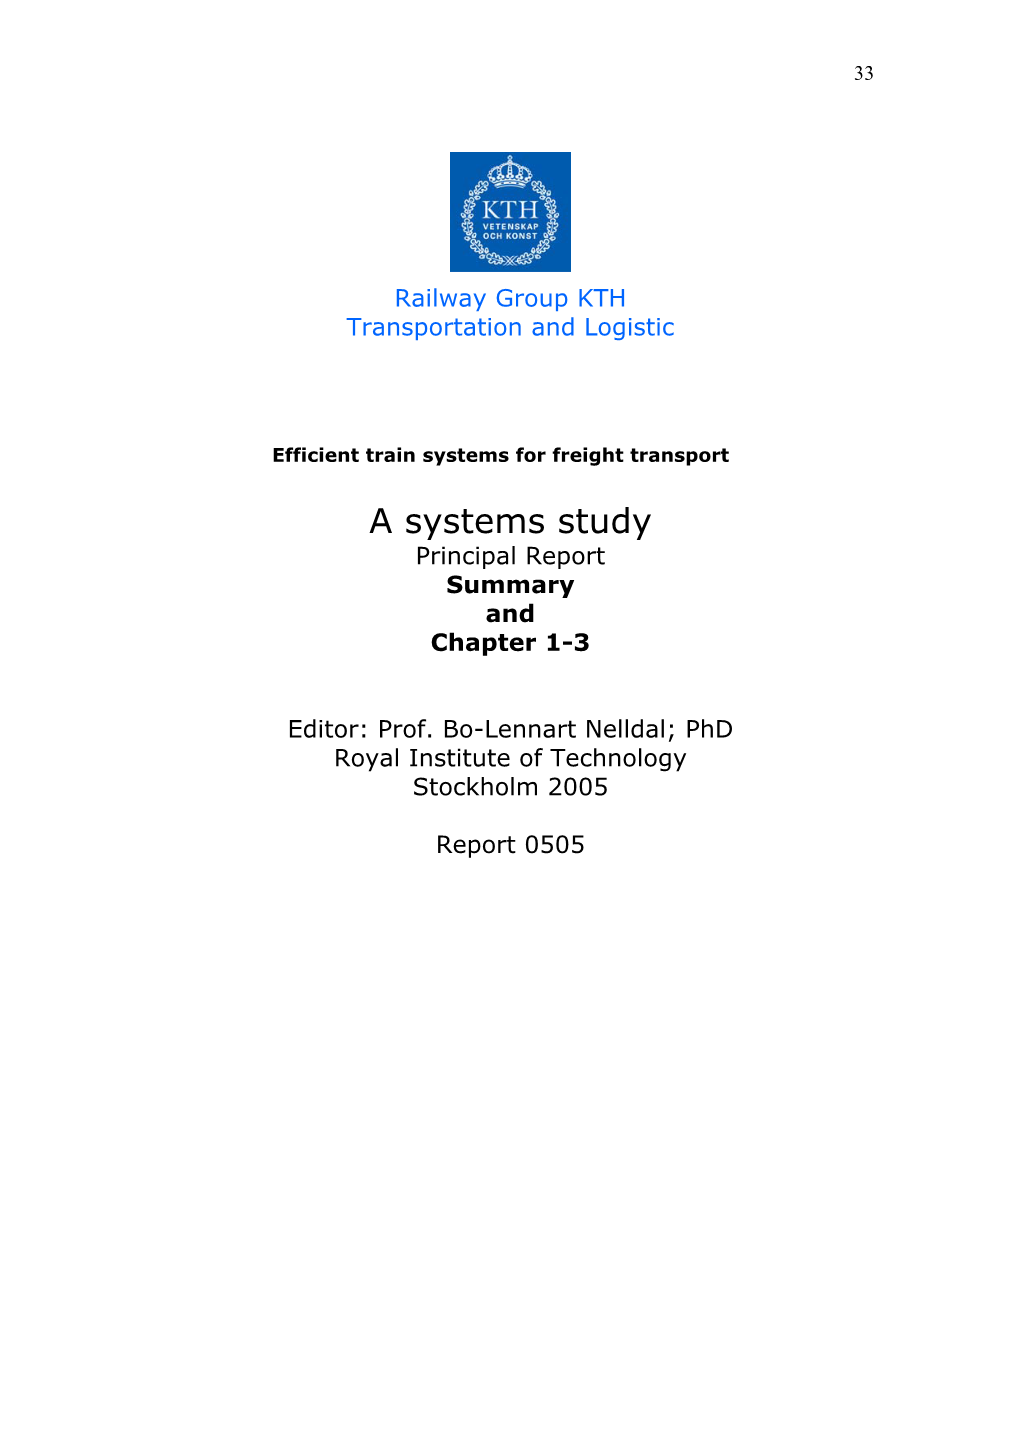 A Systems Study Principal Report Summary and Chapter 1-3